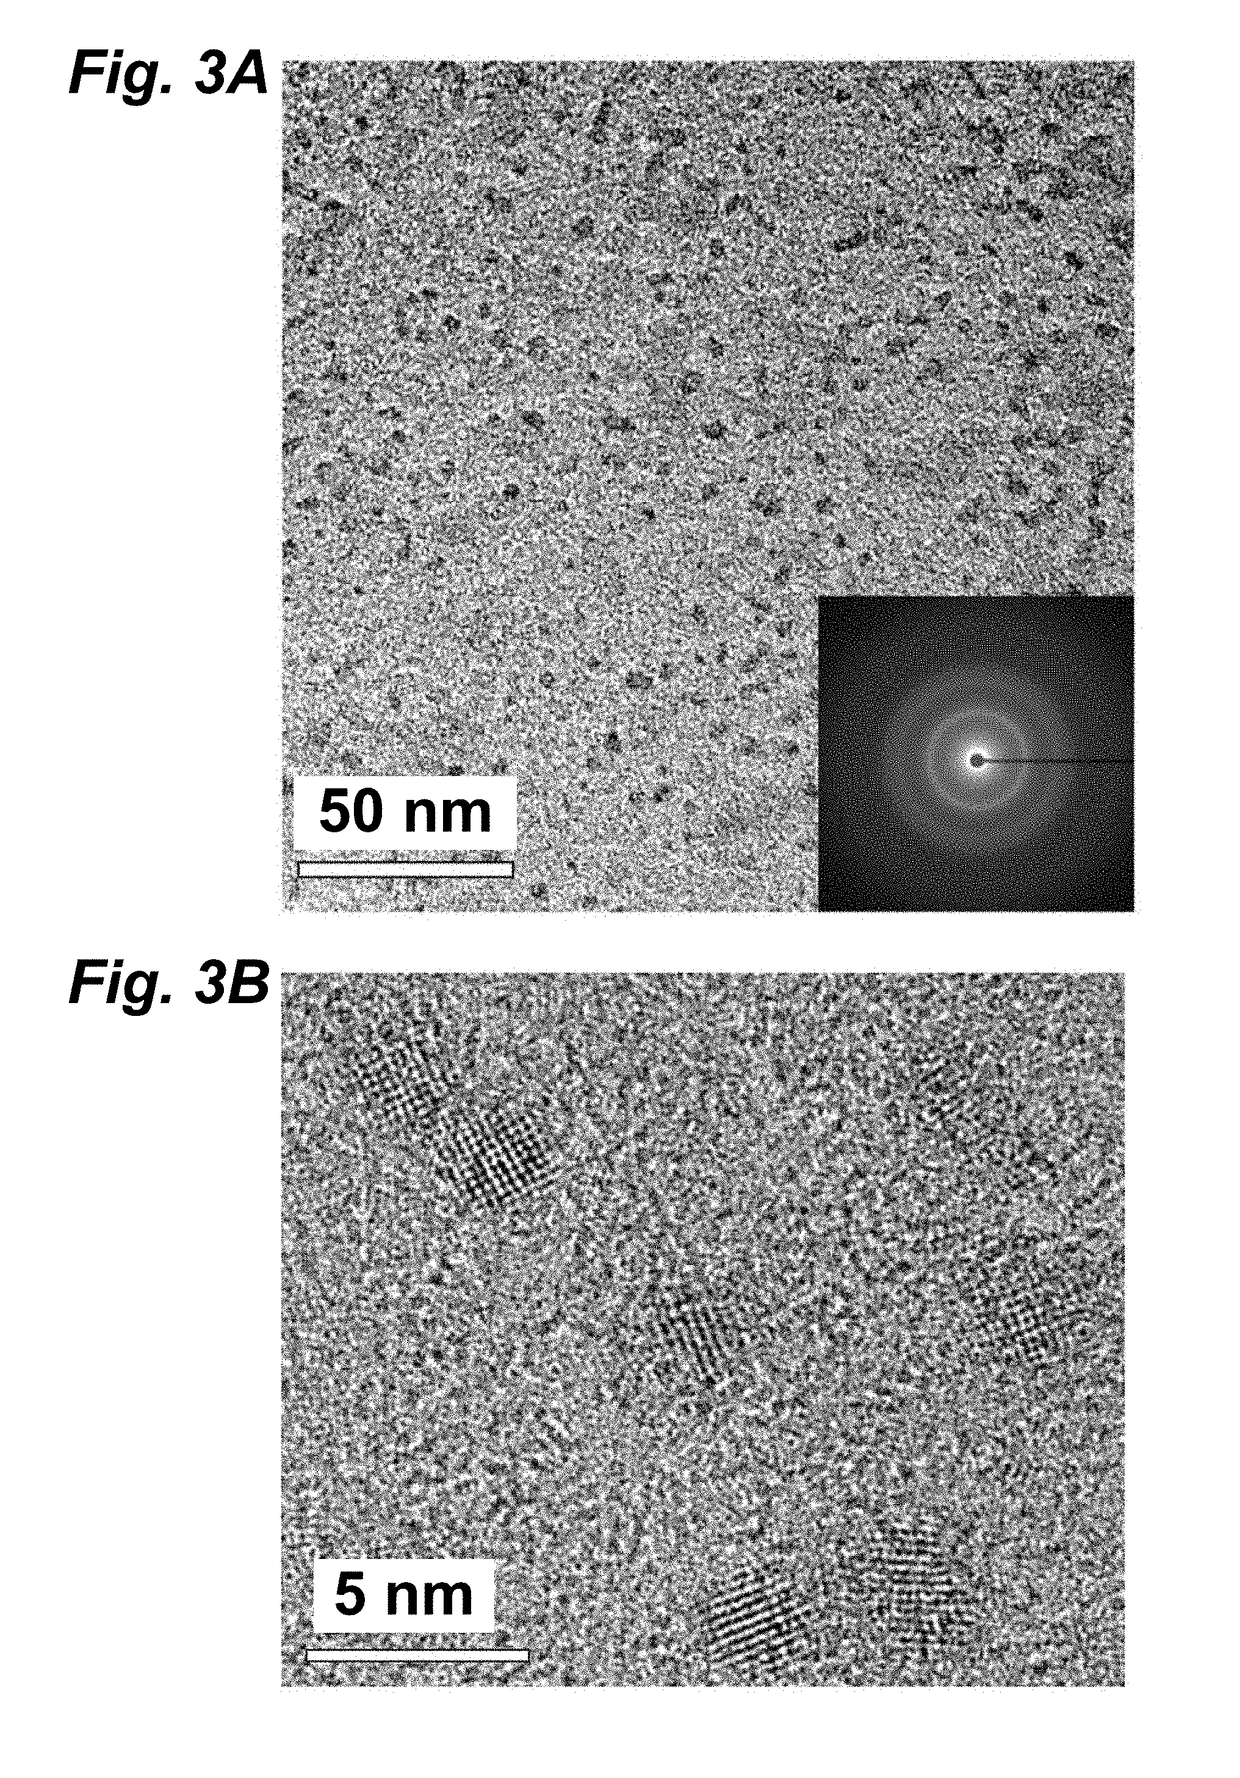 Isolated enzymatic manufacture of semiconductor nanoparticles